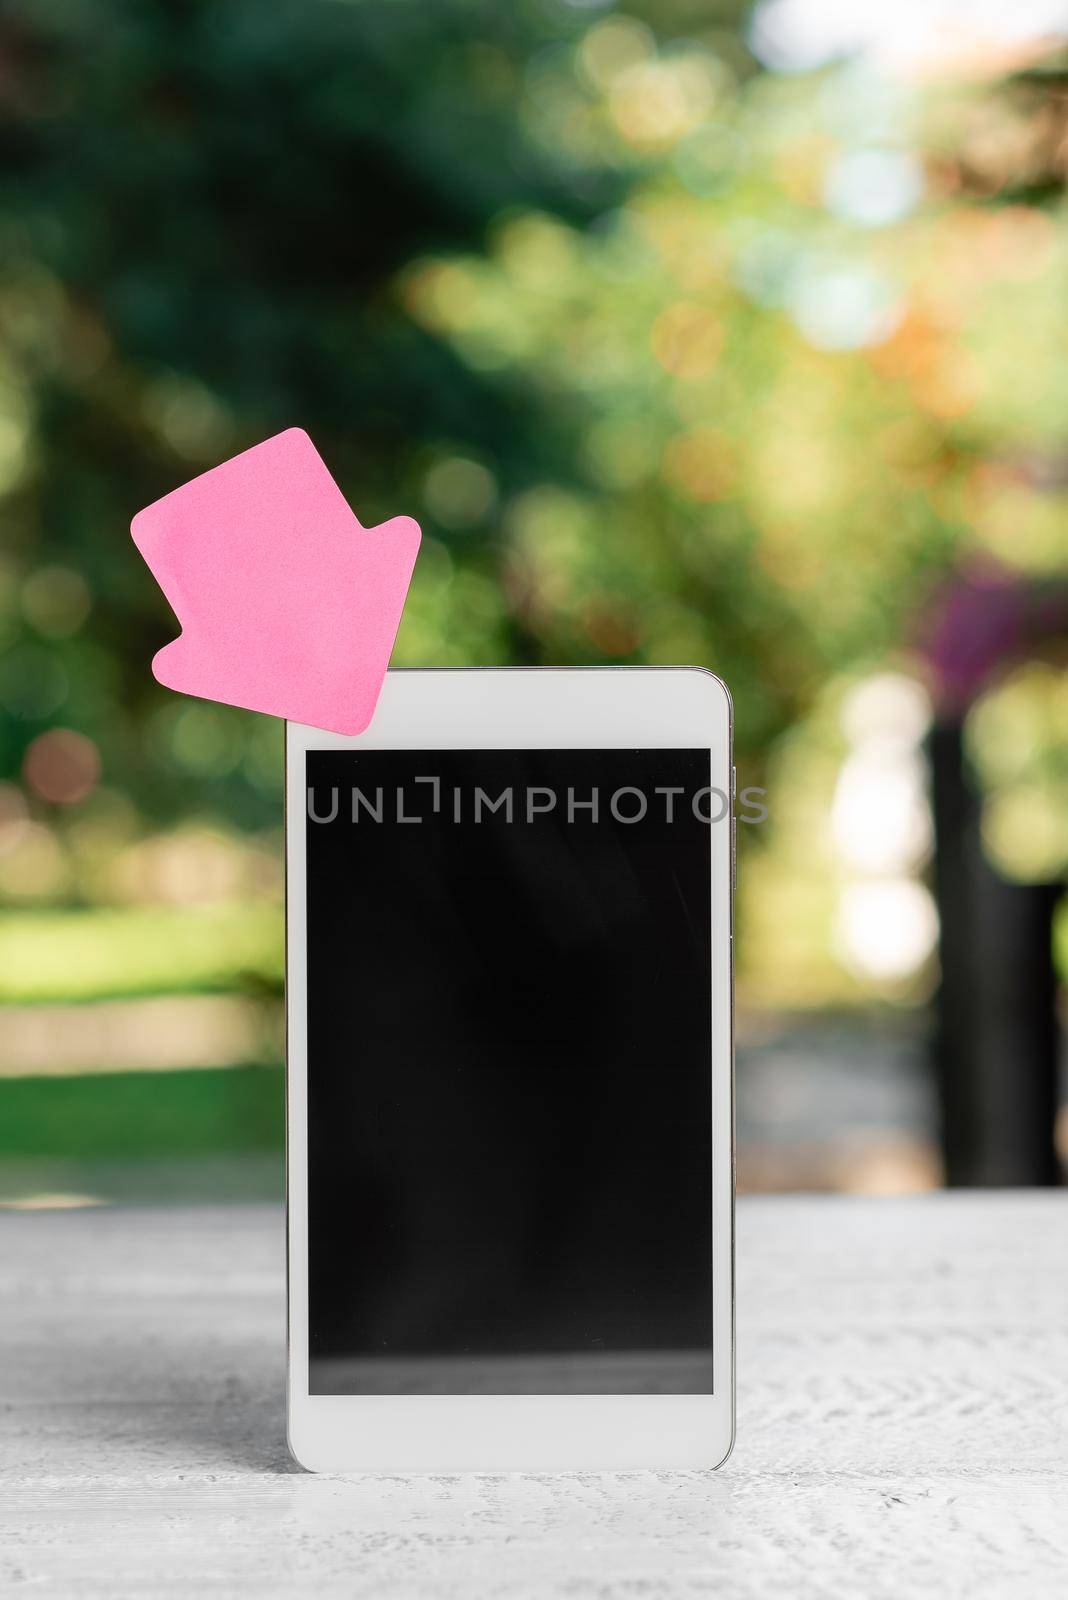 Abstract Outdoor Smartphone Photography, Displaying New Device